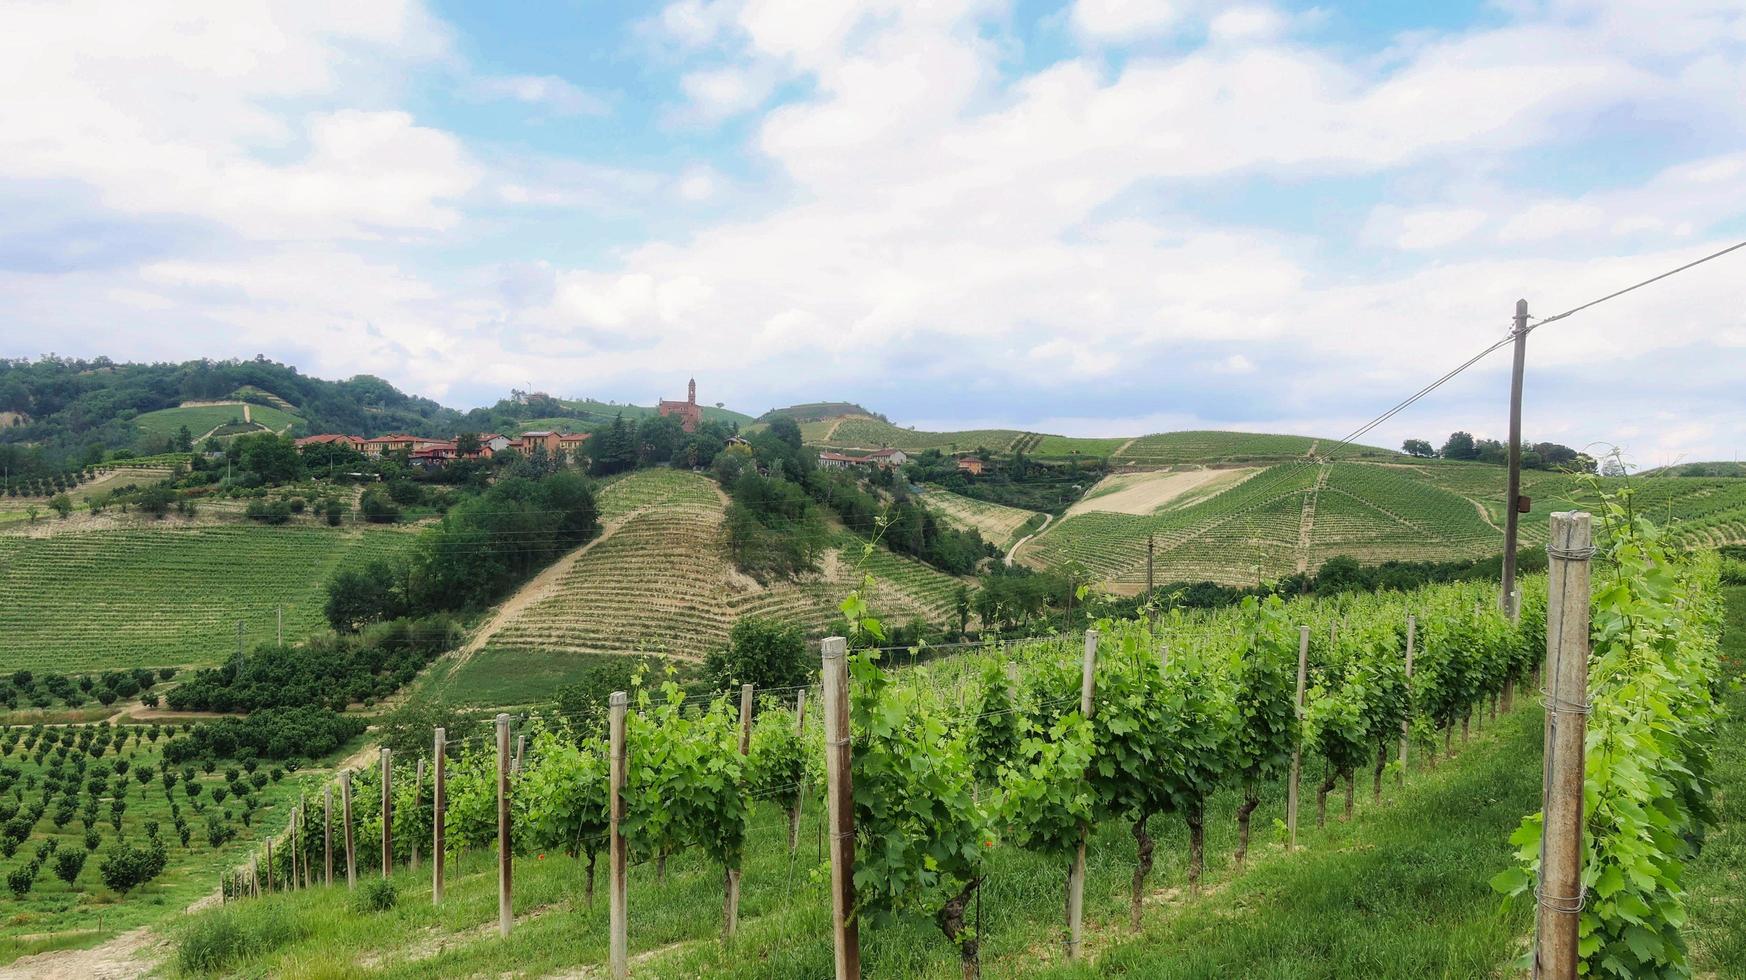 landscapes of vines and rows of grapes in Monta d'alba in the Piedmontese Langhe photo